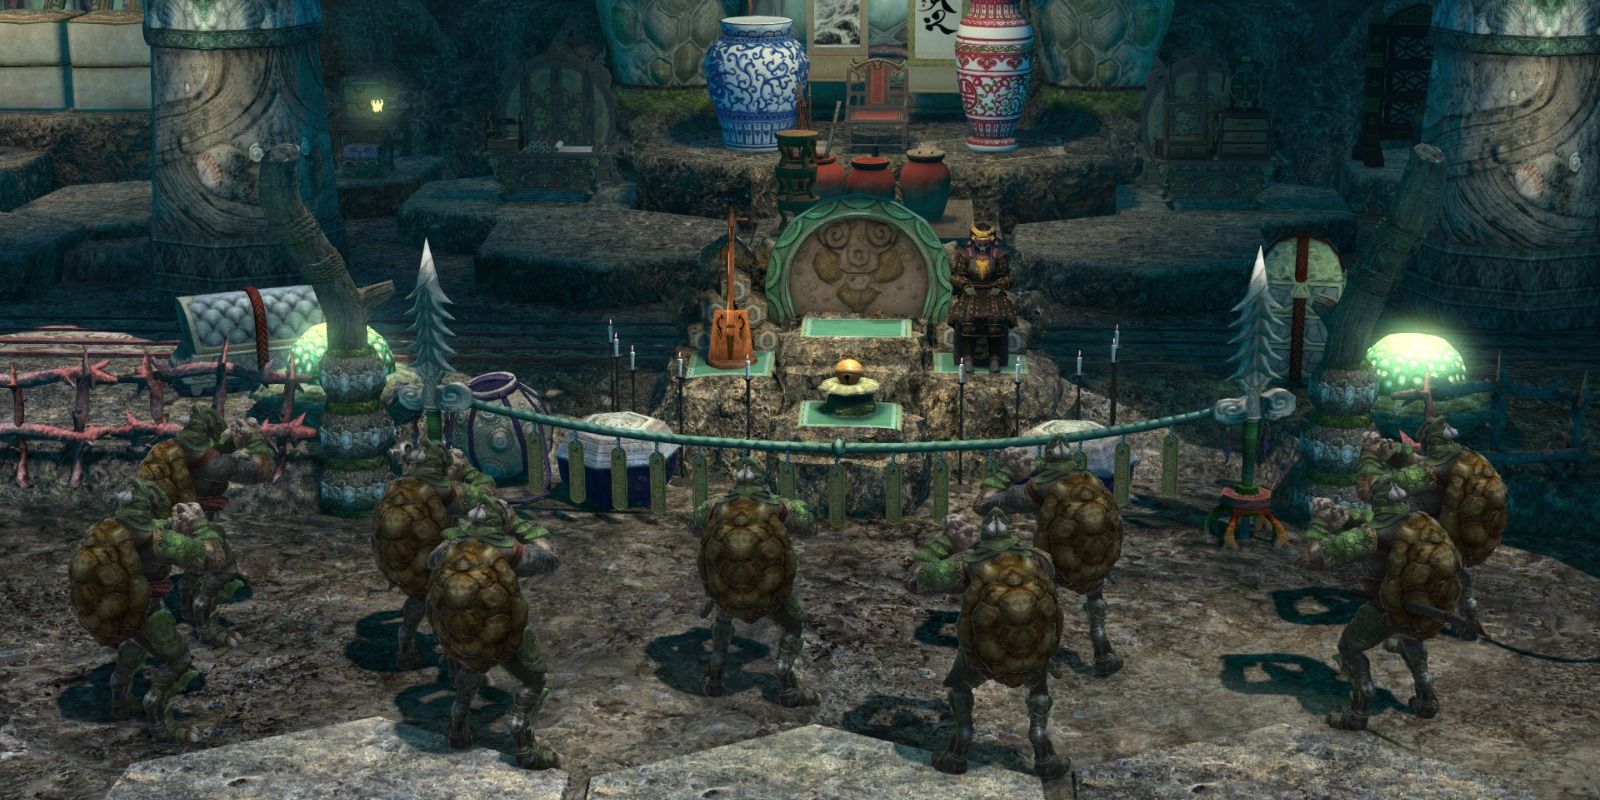 The Kojin worshipping their hoard from the story quests in Final Fantasy 14